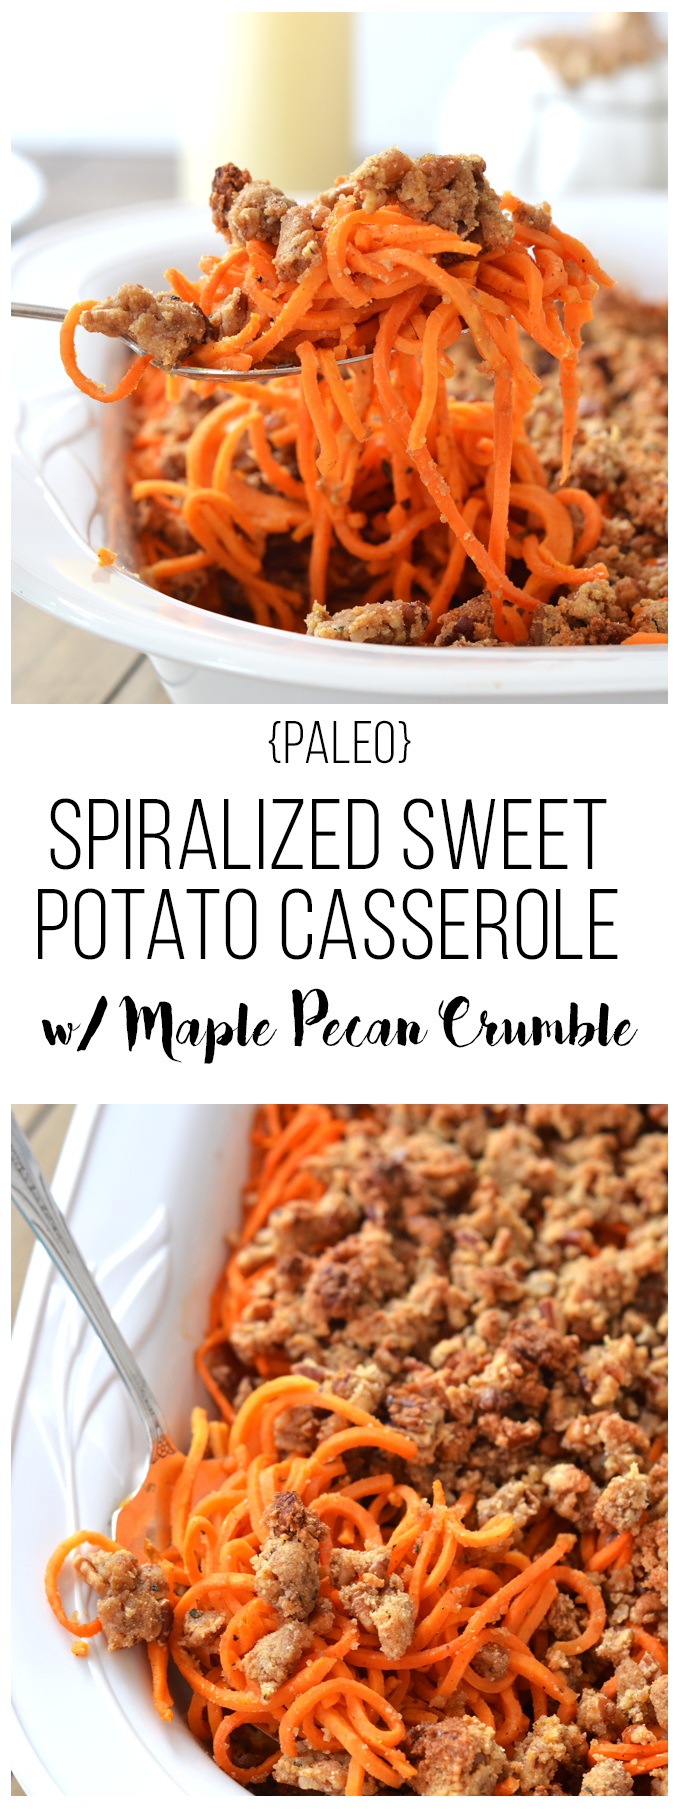 This Spiralized Sweet Potato Casserole w/ Maple Pecan Crumble is the perfect Paleo, grain-free & refined sugar free thanksgiving side dish! It is really perfect for any occasion!